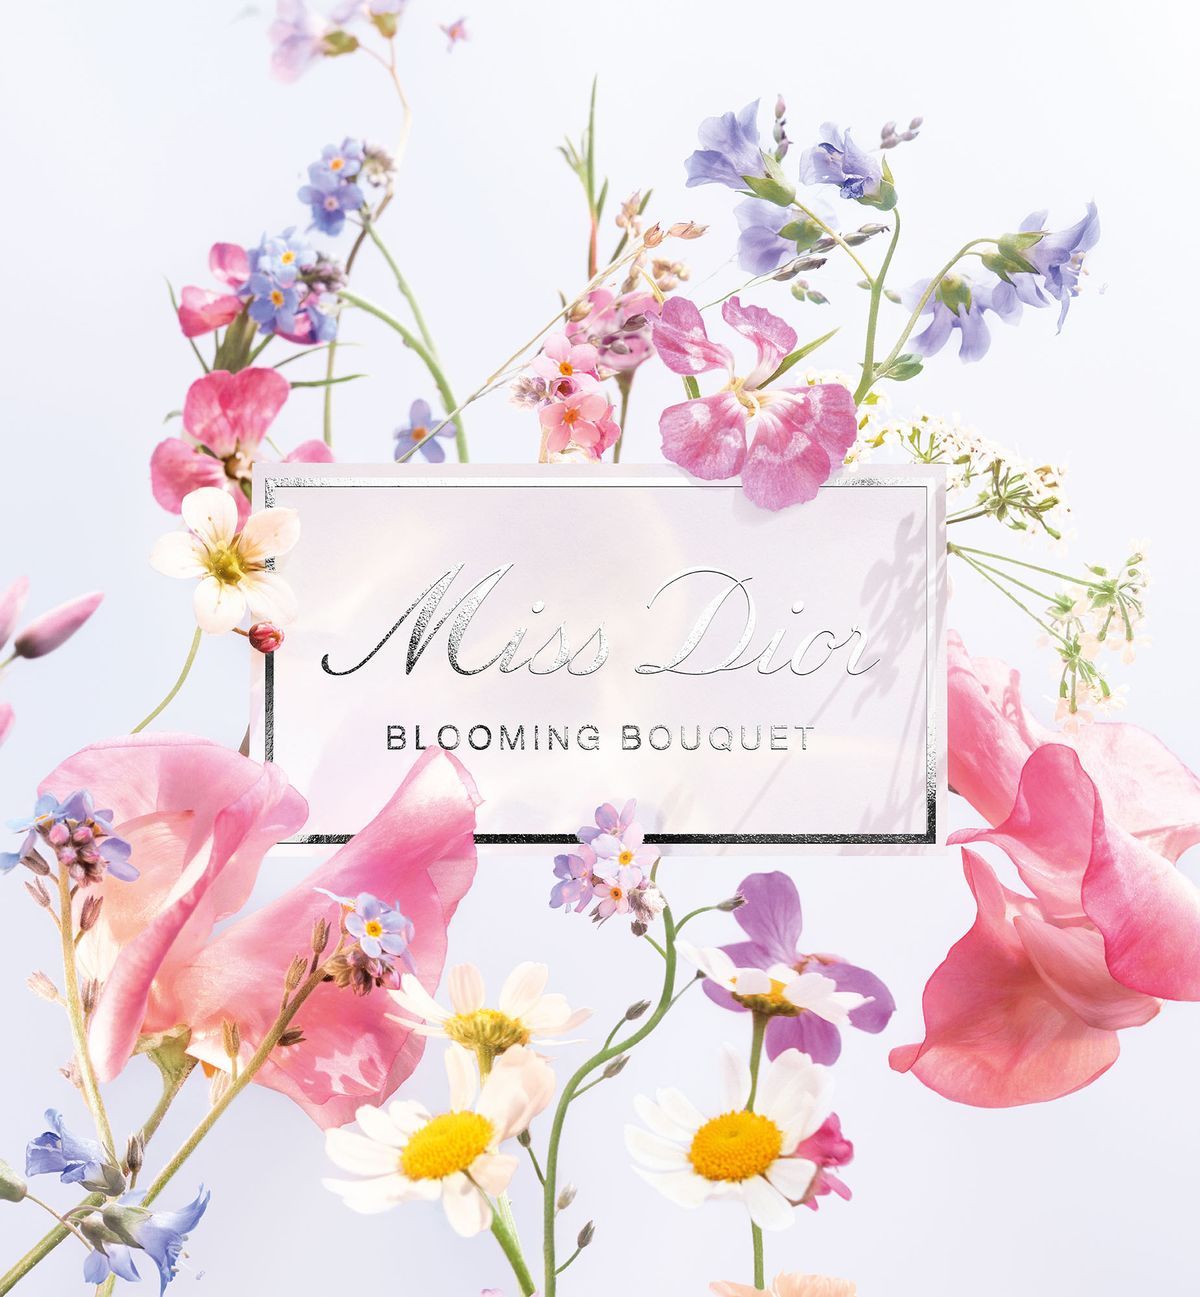 Miss-Dior-Blooming-Bouquet-100ml-05